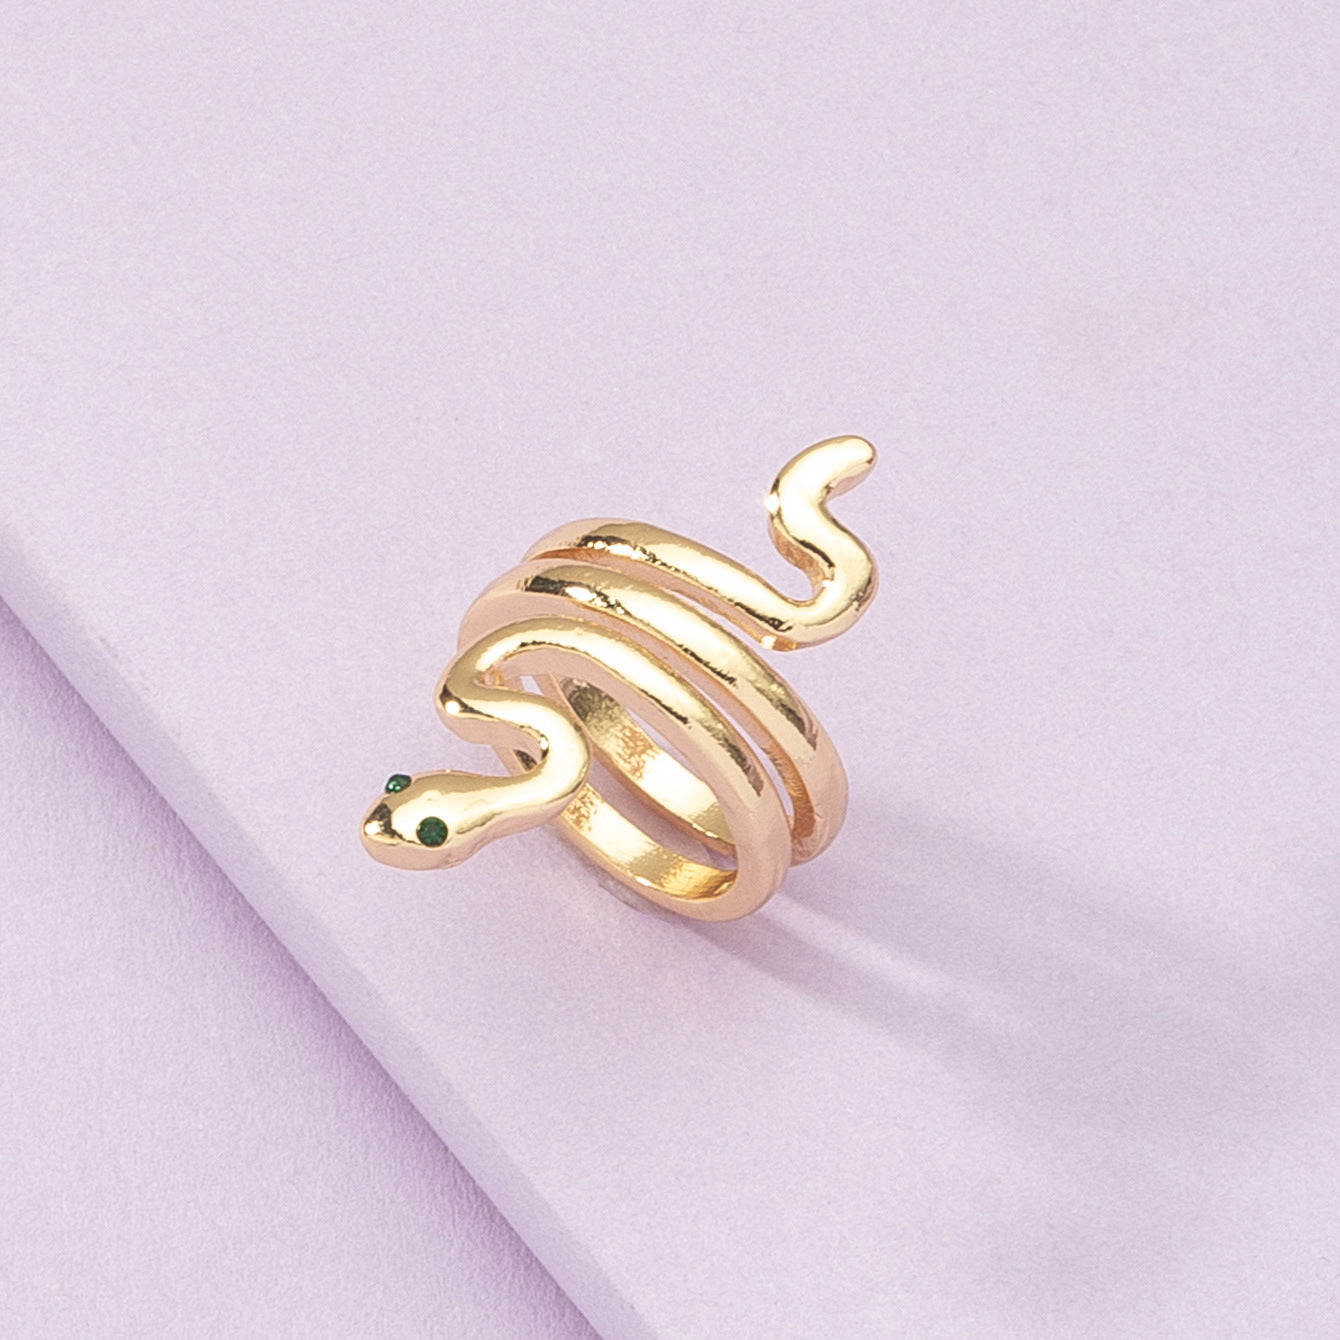 Wholesale Snake Ring with Cross-Border Charm